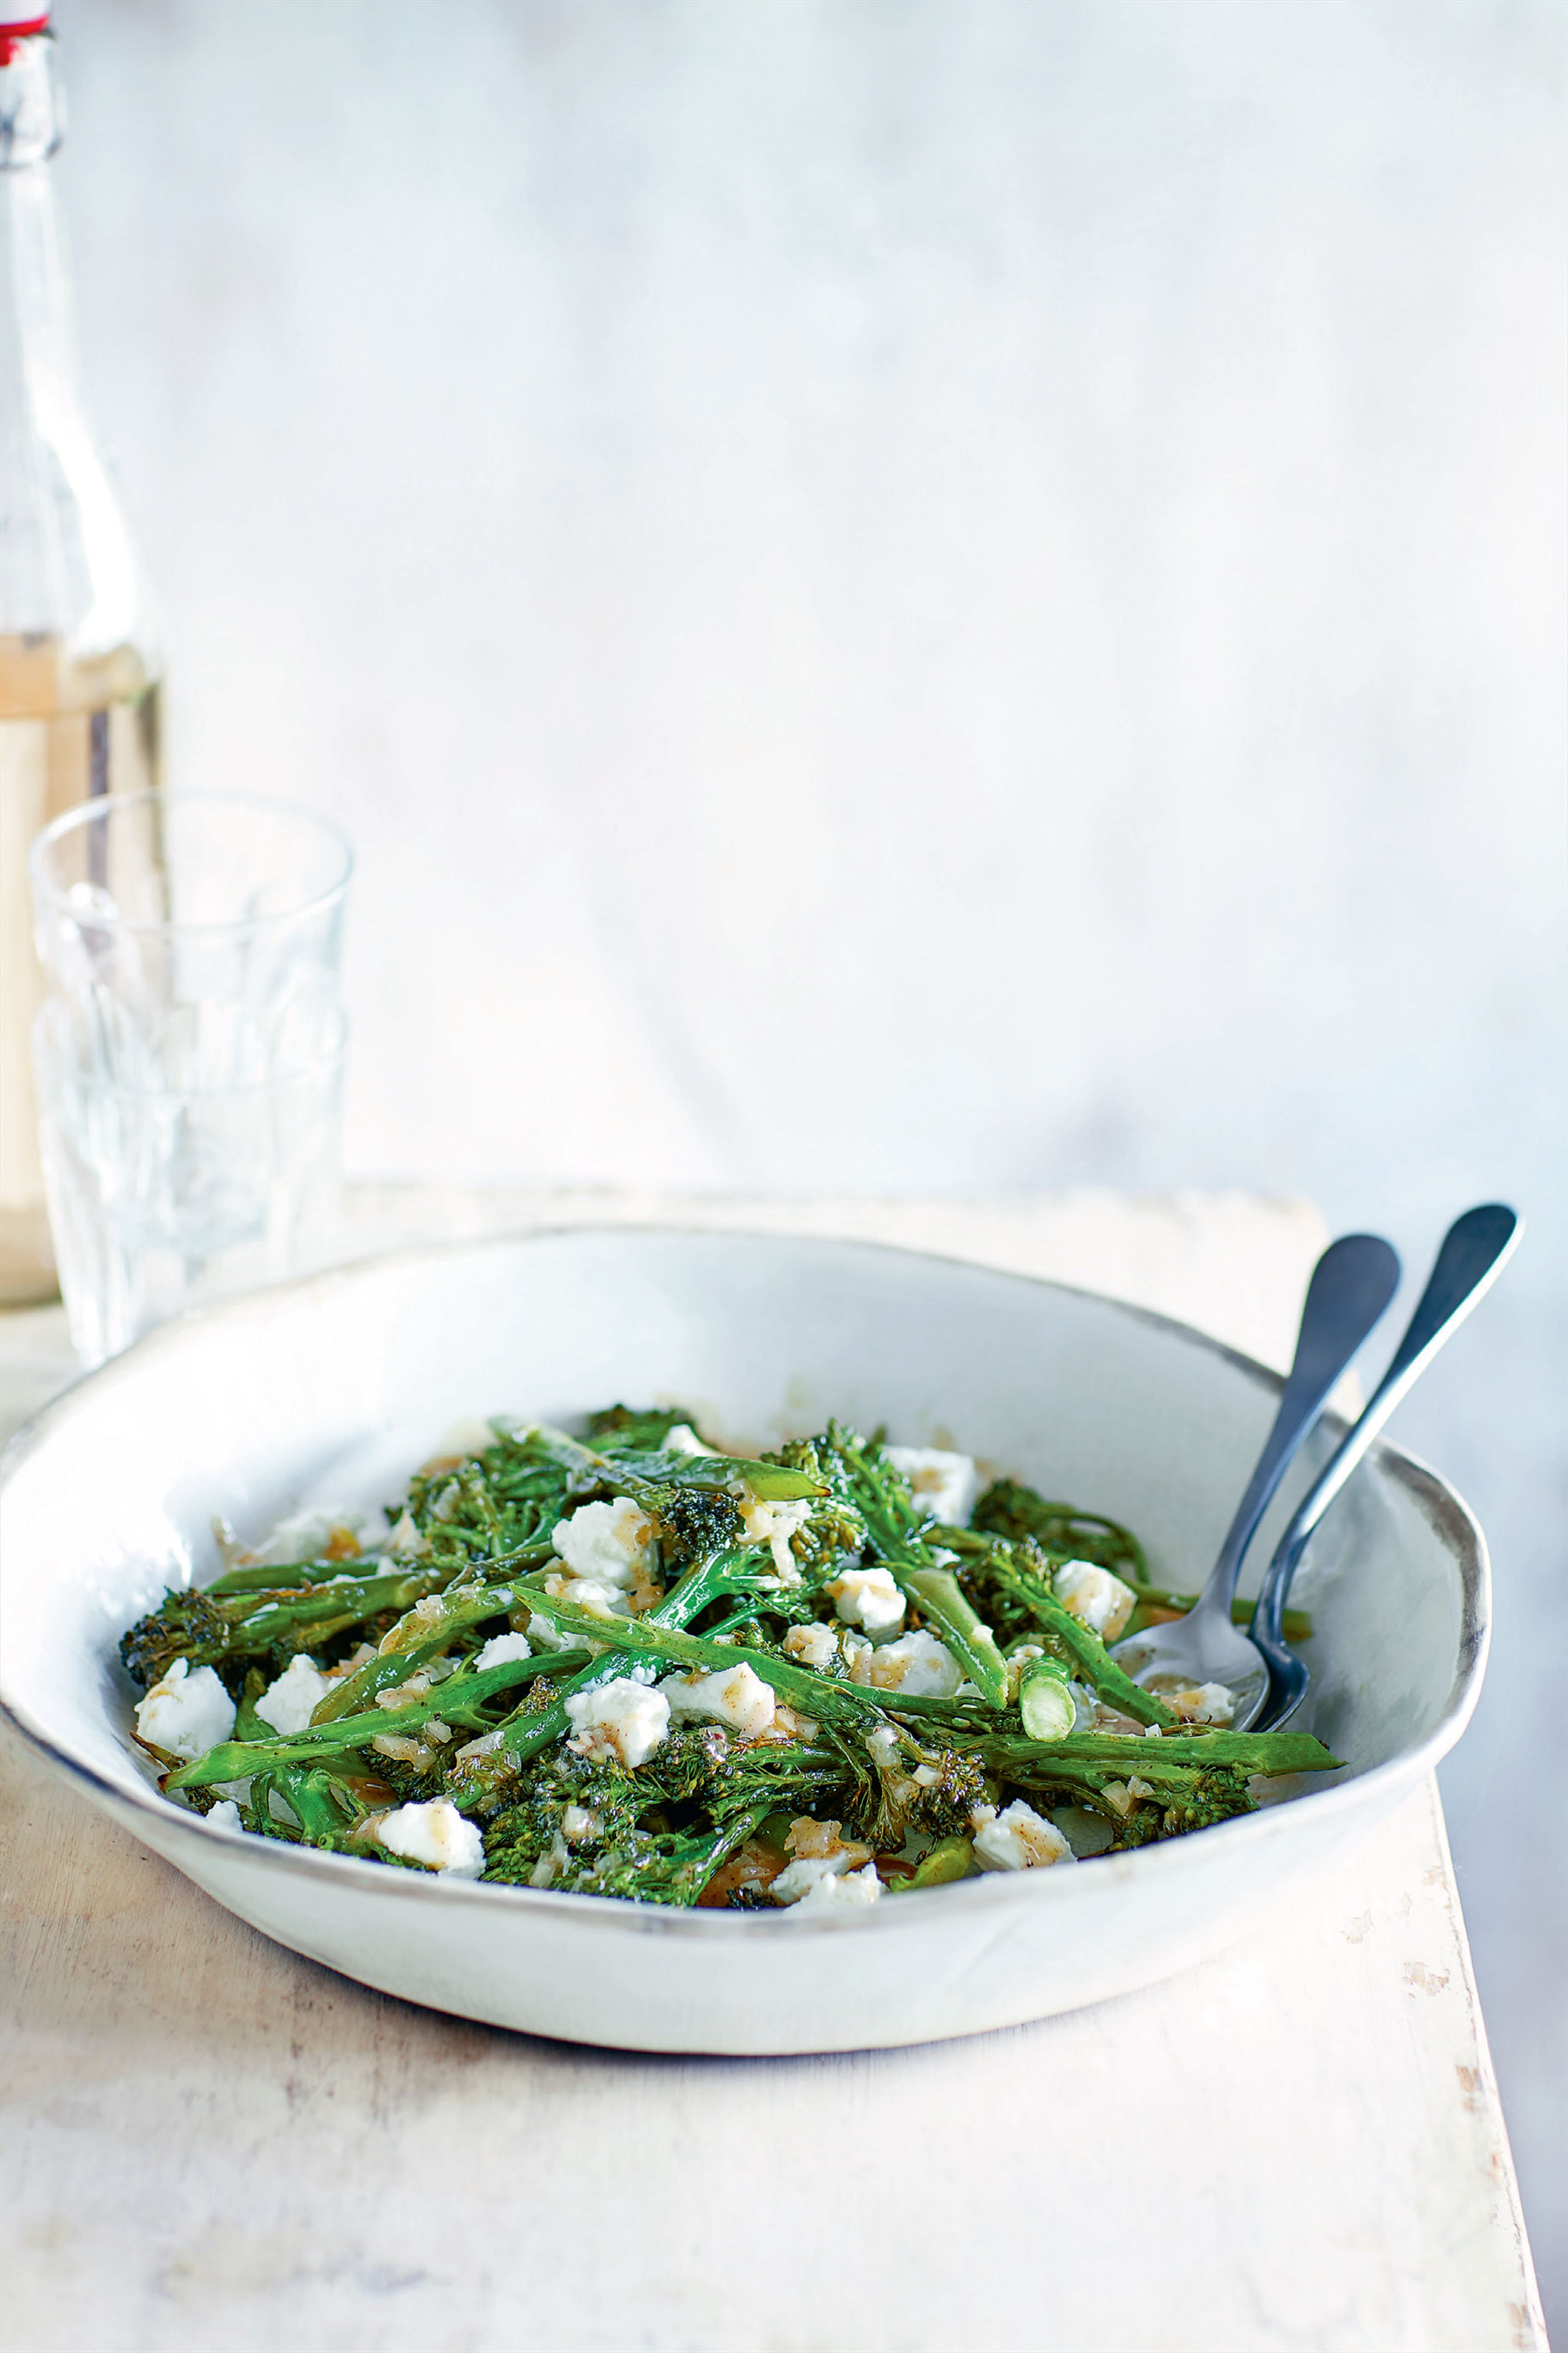 Seared tenderstem broccoli with goat’s cheese and walnut salad